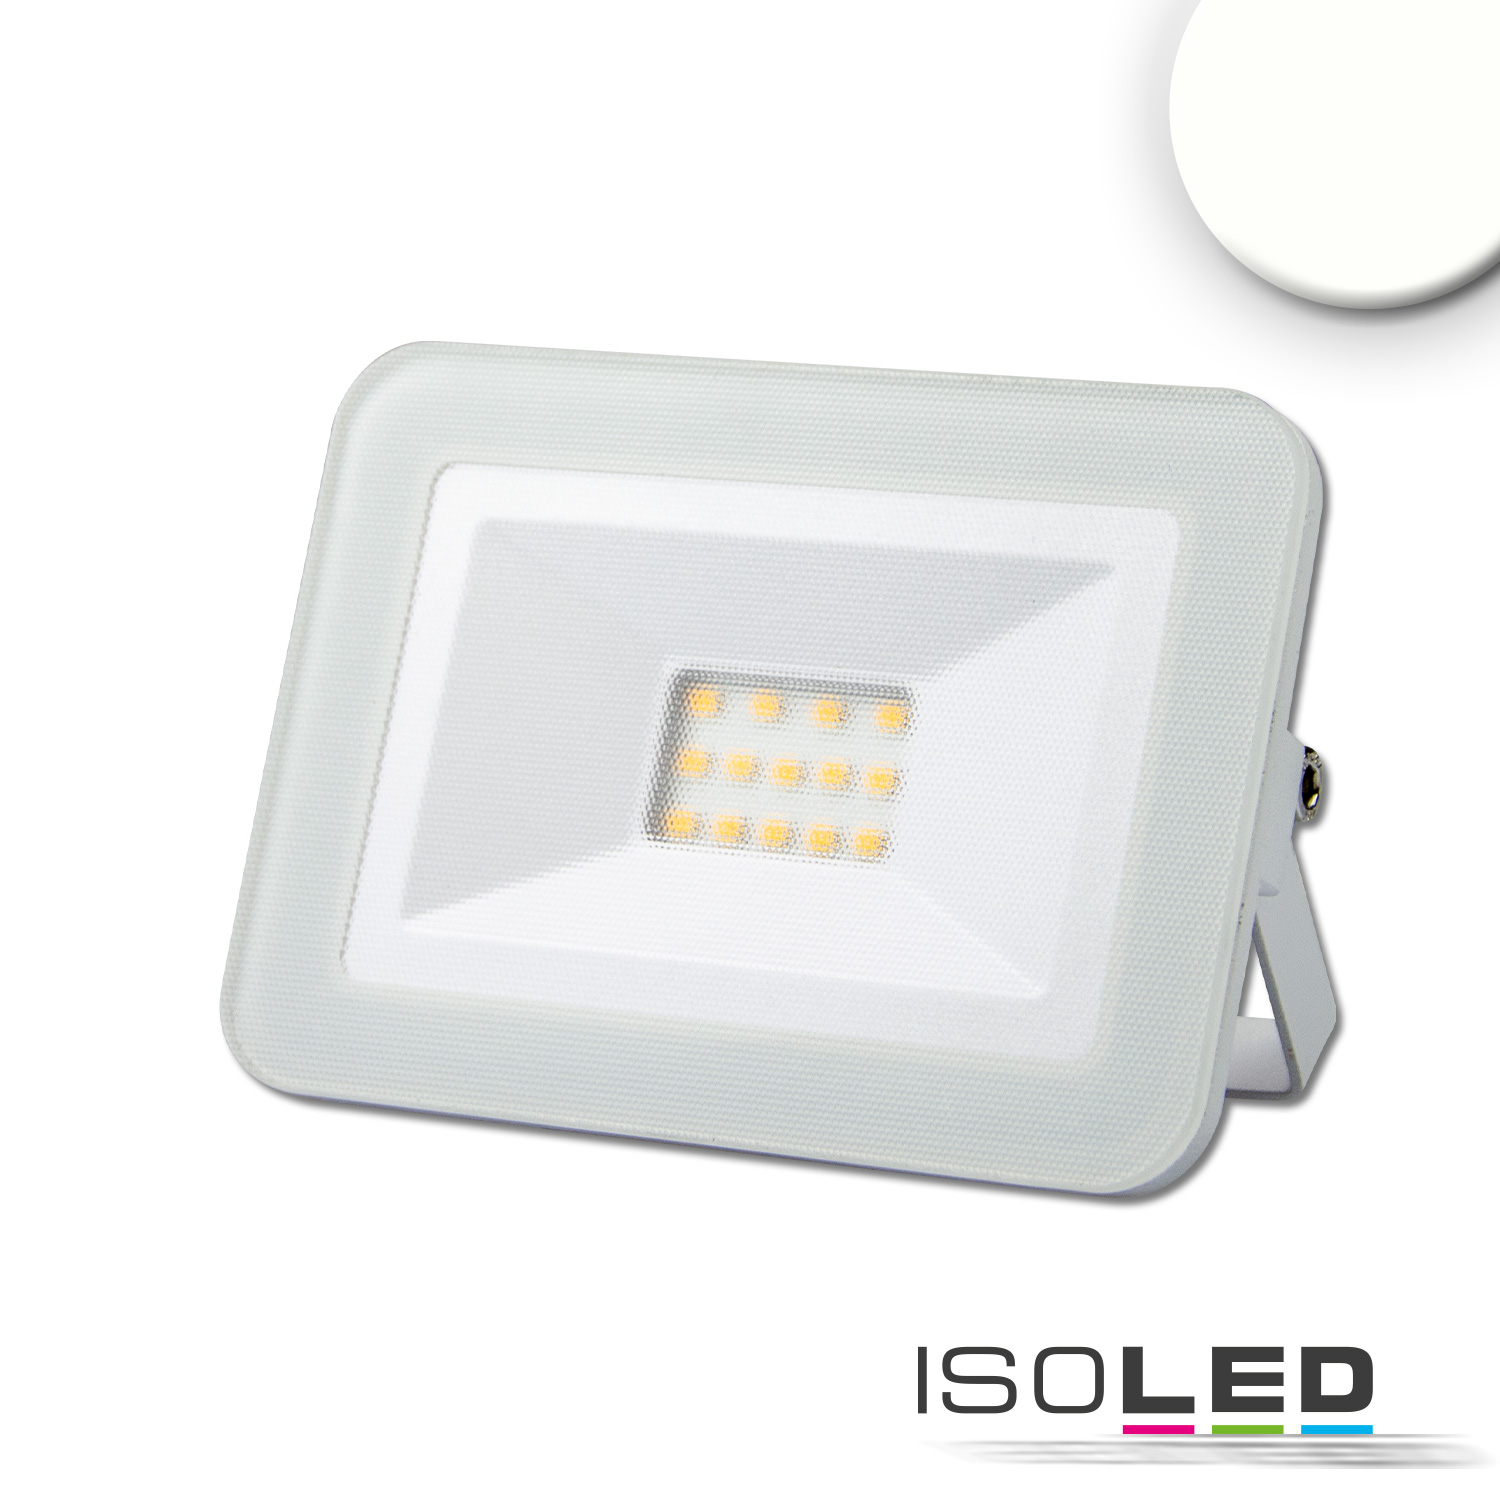 ISOLED 115107 LED Fluter Pad 10W, weiss, 4000K